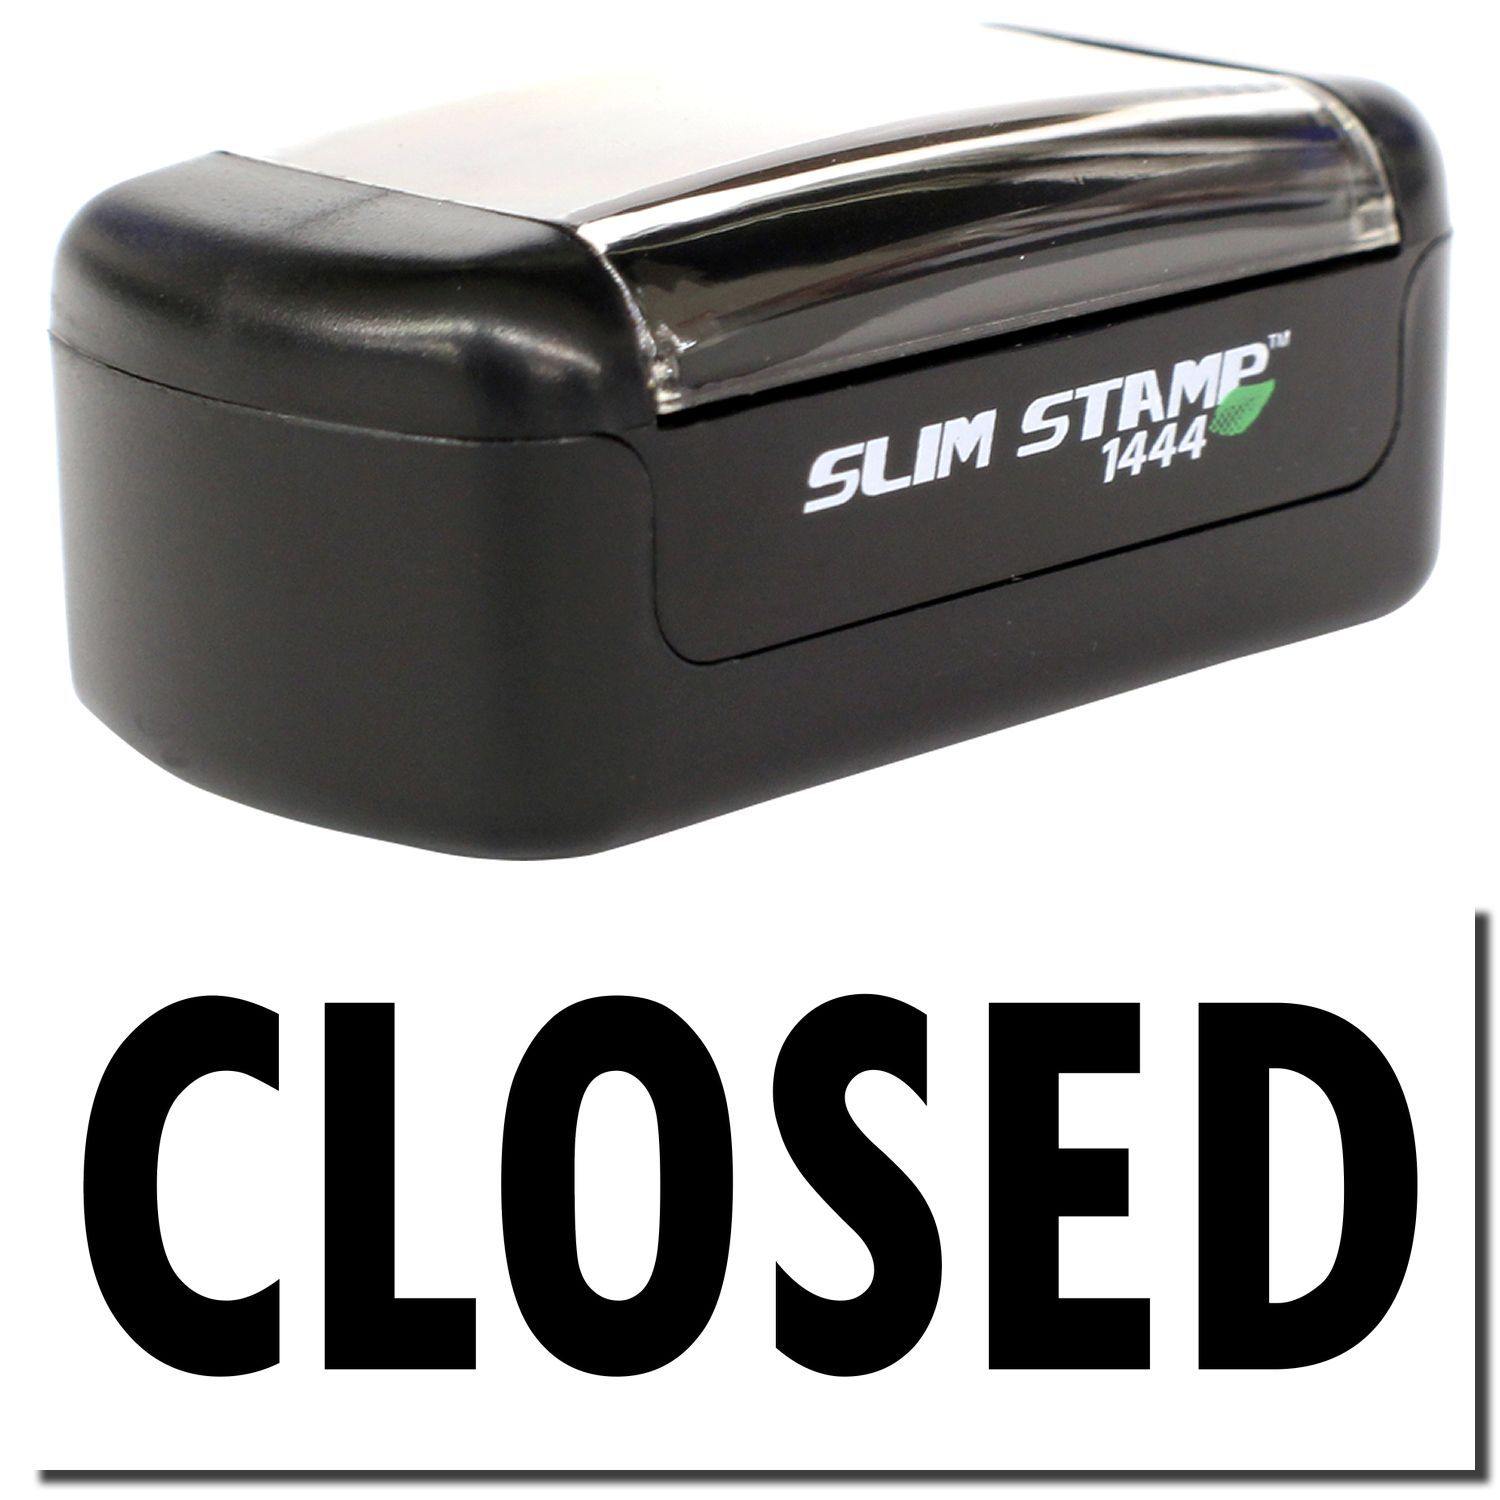 A stock office pre-inked stamp with a stamped image showing how the text "CLOSED" is displayed after stamping.